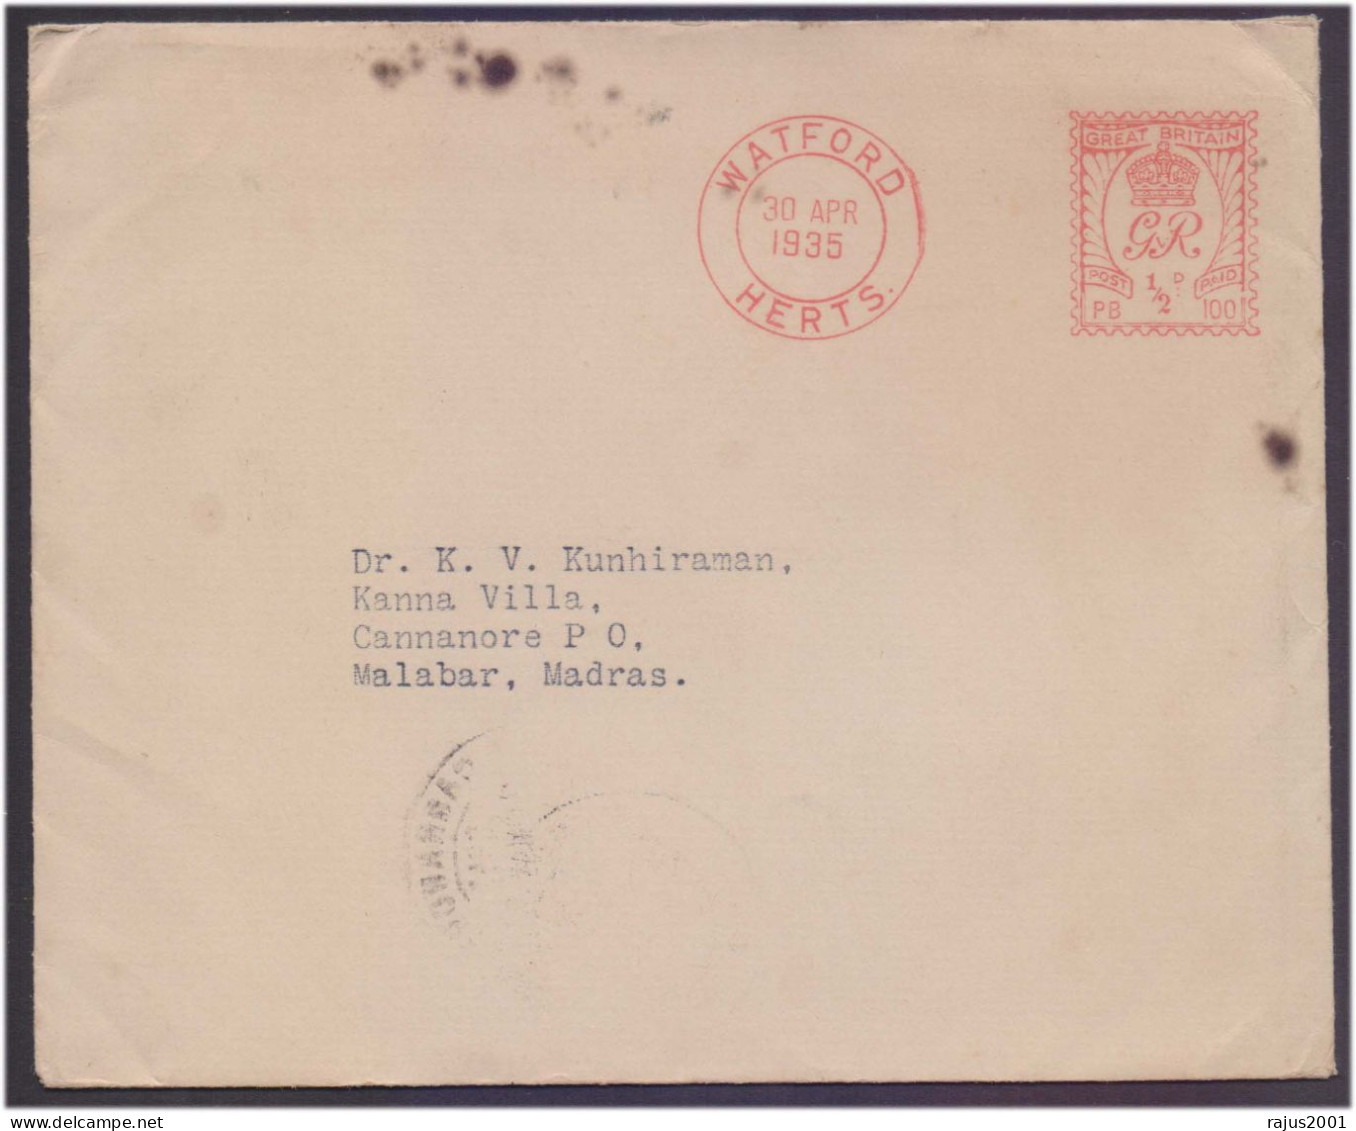 WATFORD HERTS EMA RED METER FRANK BRITAIN TO MALABAR MADRAS INDIA CIRCULATED COVER 1935 CLEAR DELIVERY MARK As Scan - Frankeermachines (EMA)